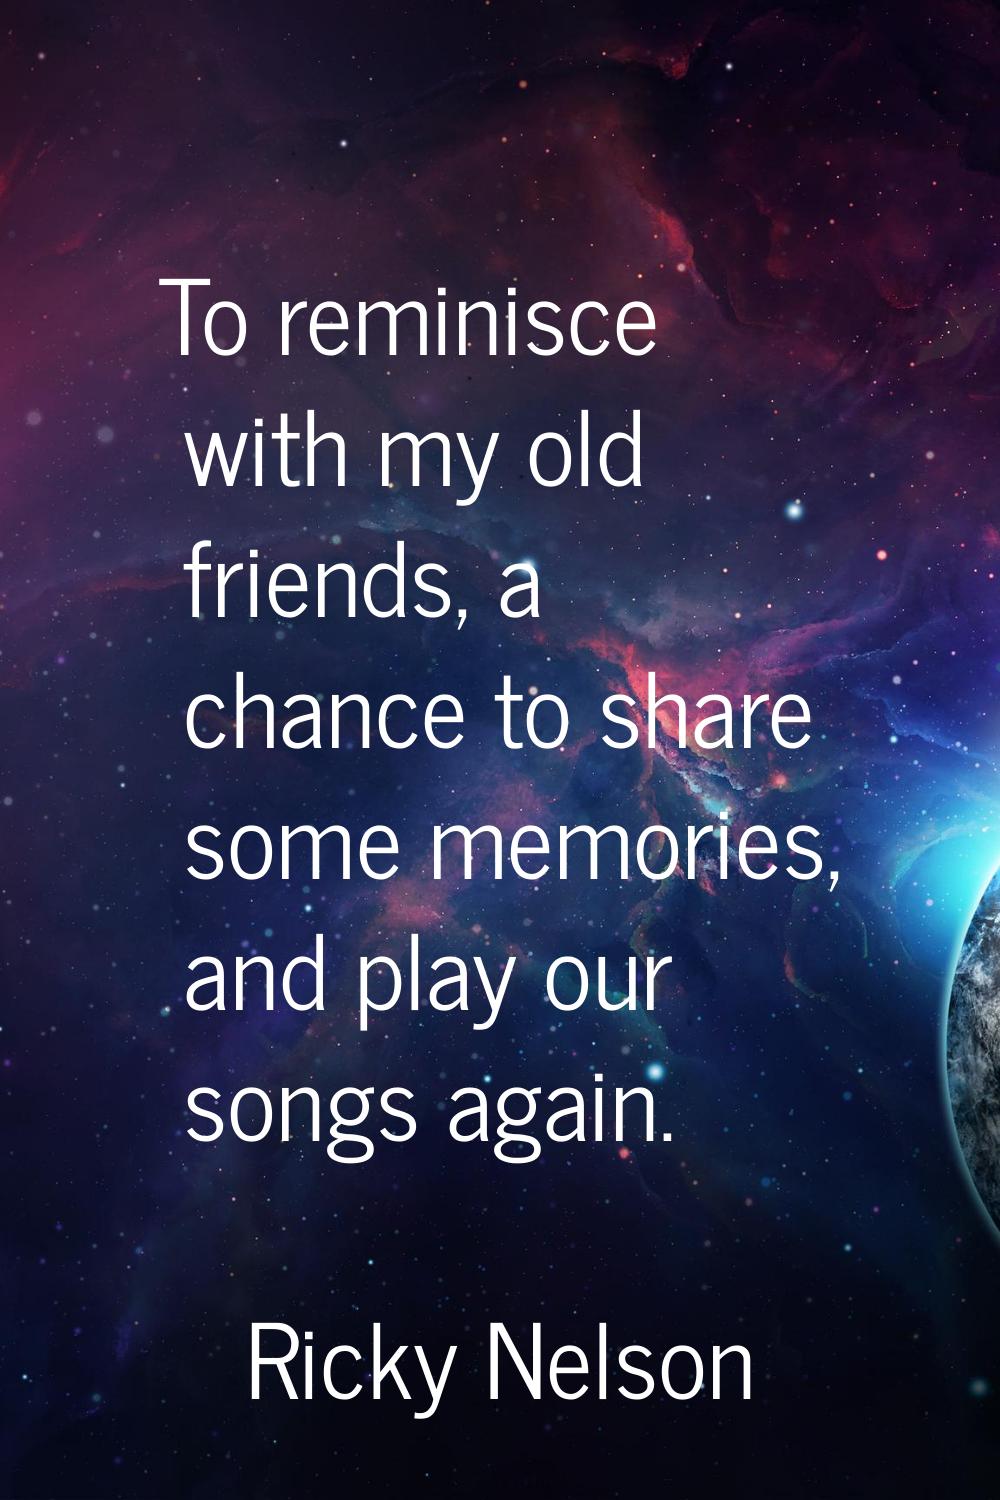 To reminisce with my old friends, a chance to share some memories, and play our songs again.